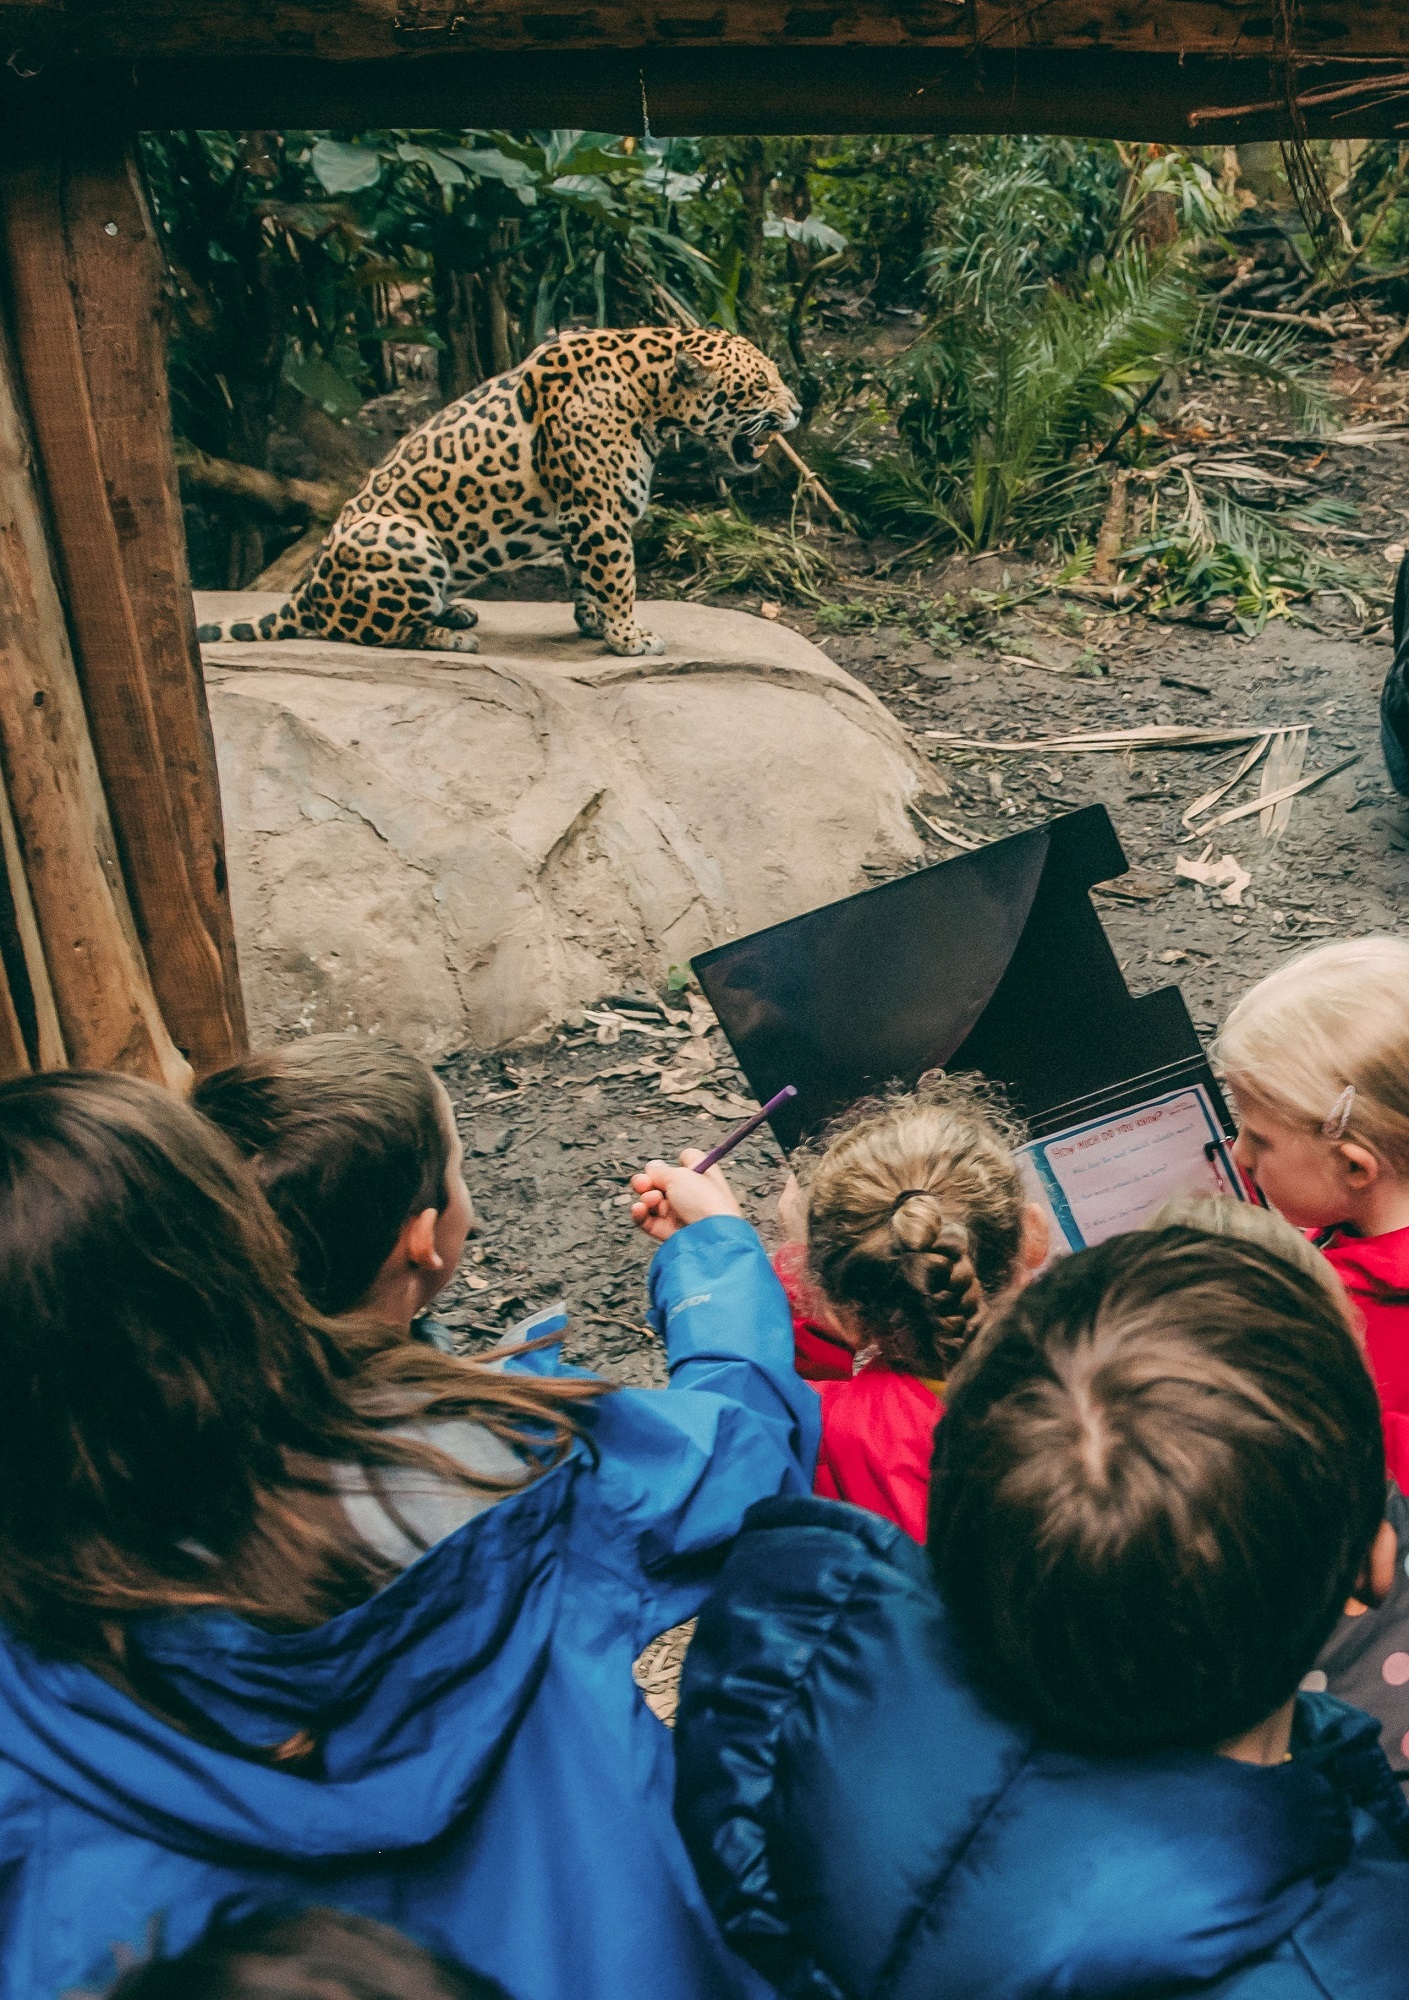 Chester Zoo has announced free tickets for children during Wednesdays planned teachers strike, which is due to impact several schools in the area.